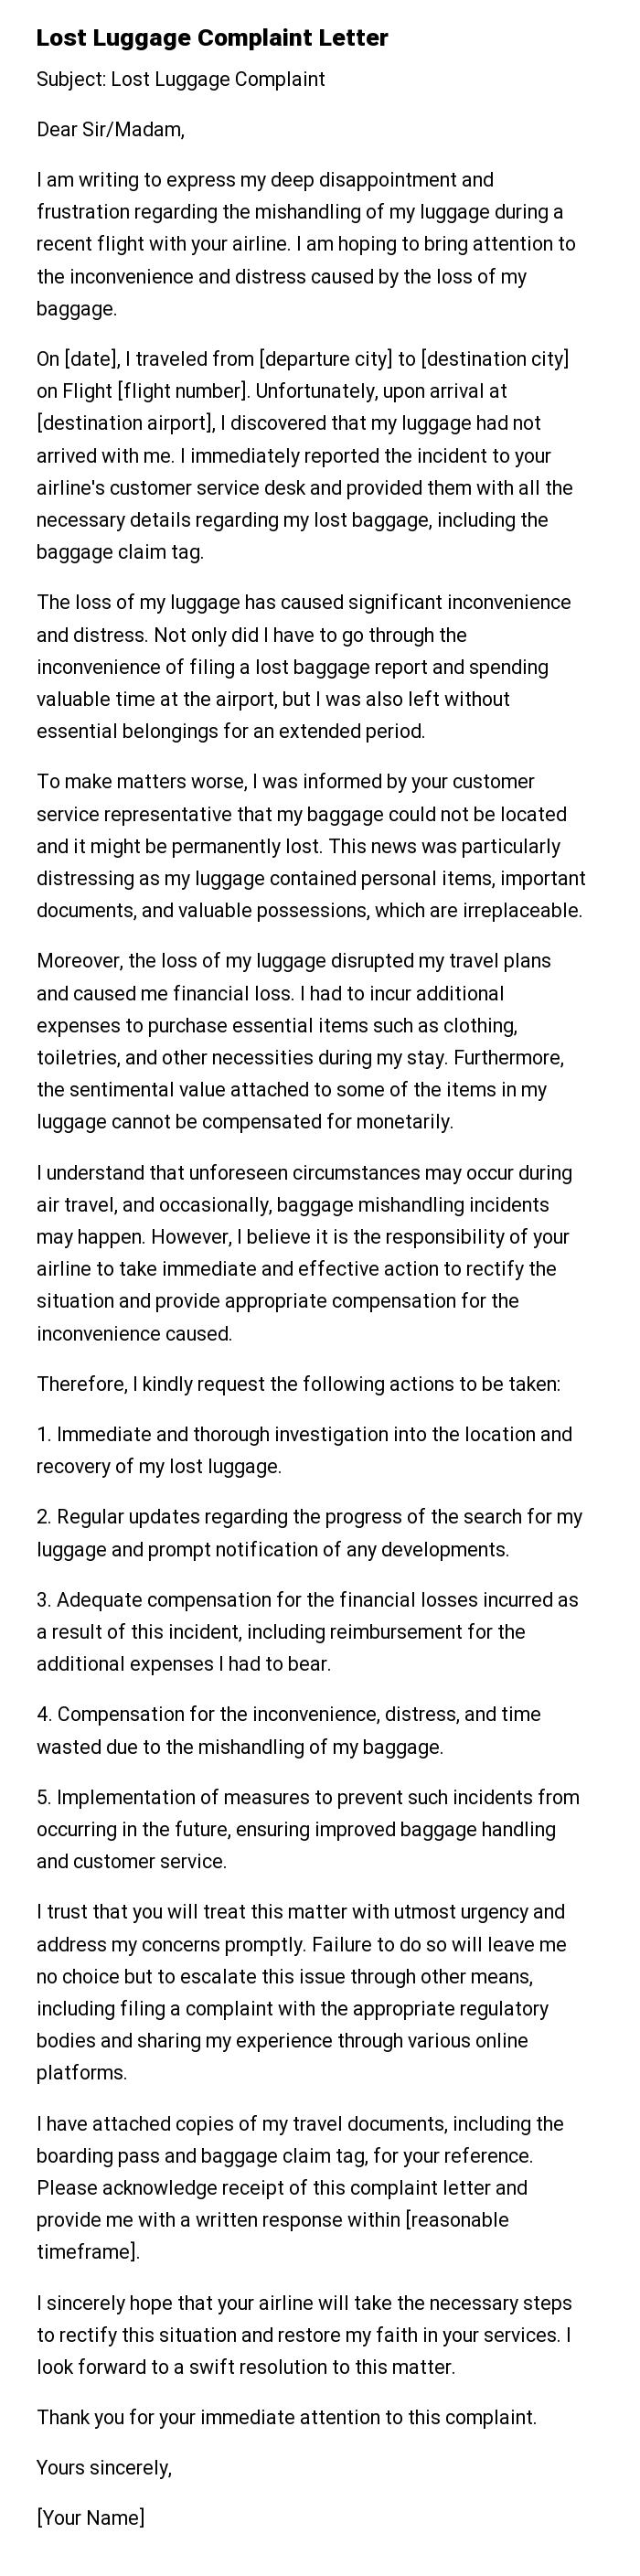 Lost Luggage Complaint Letter